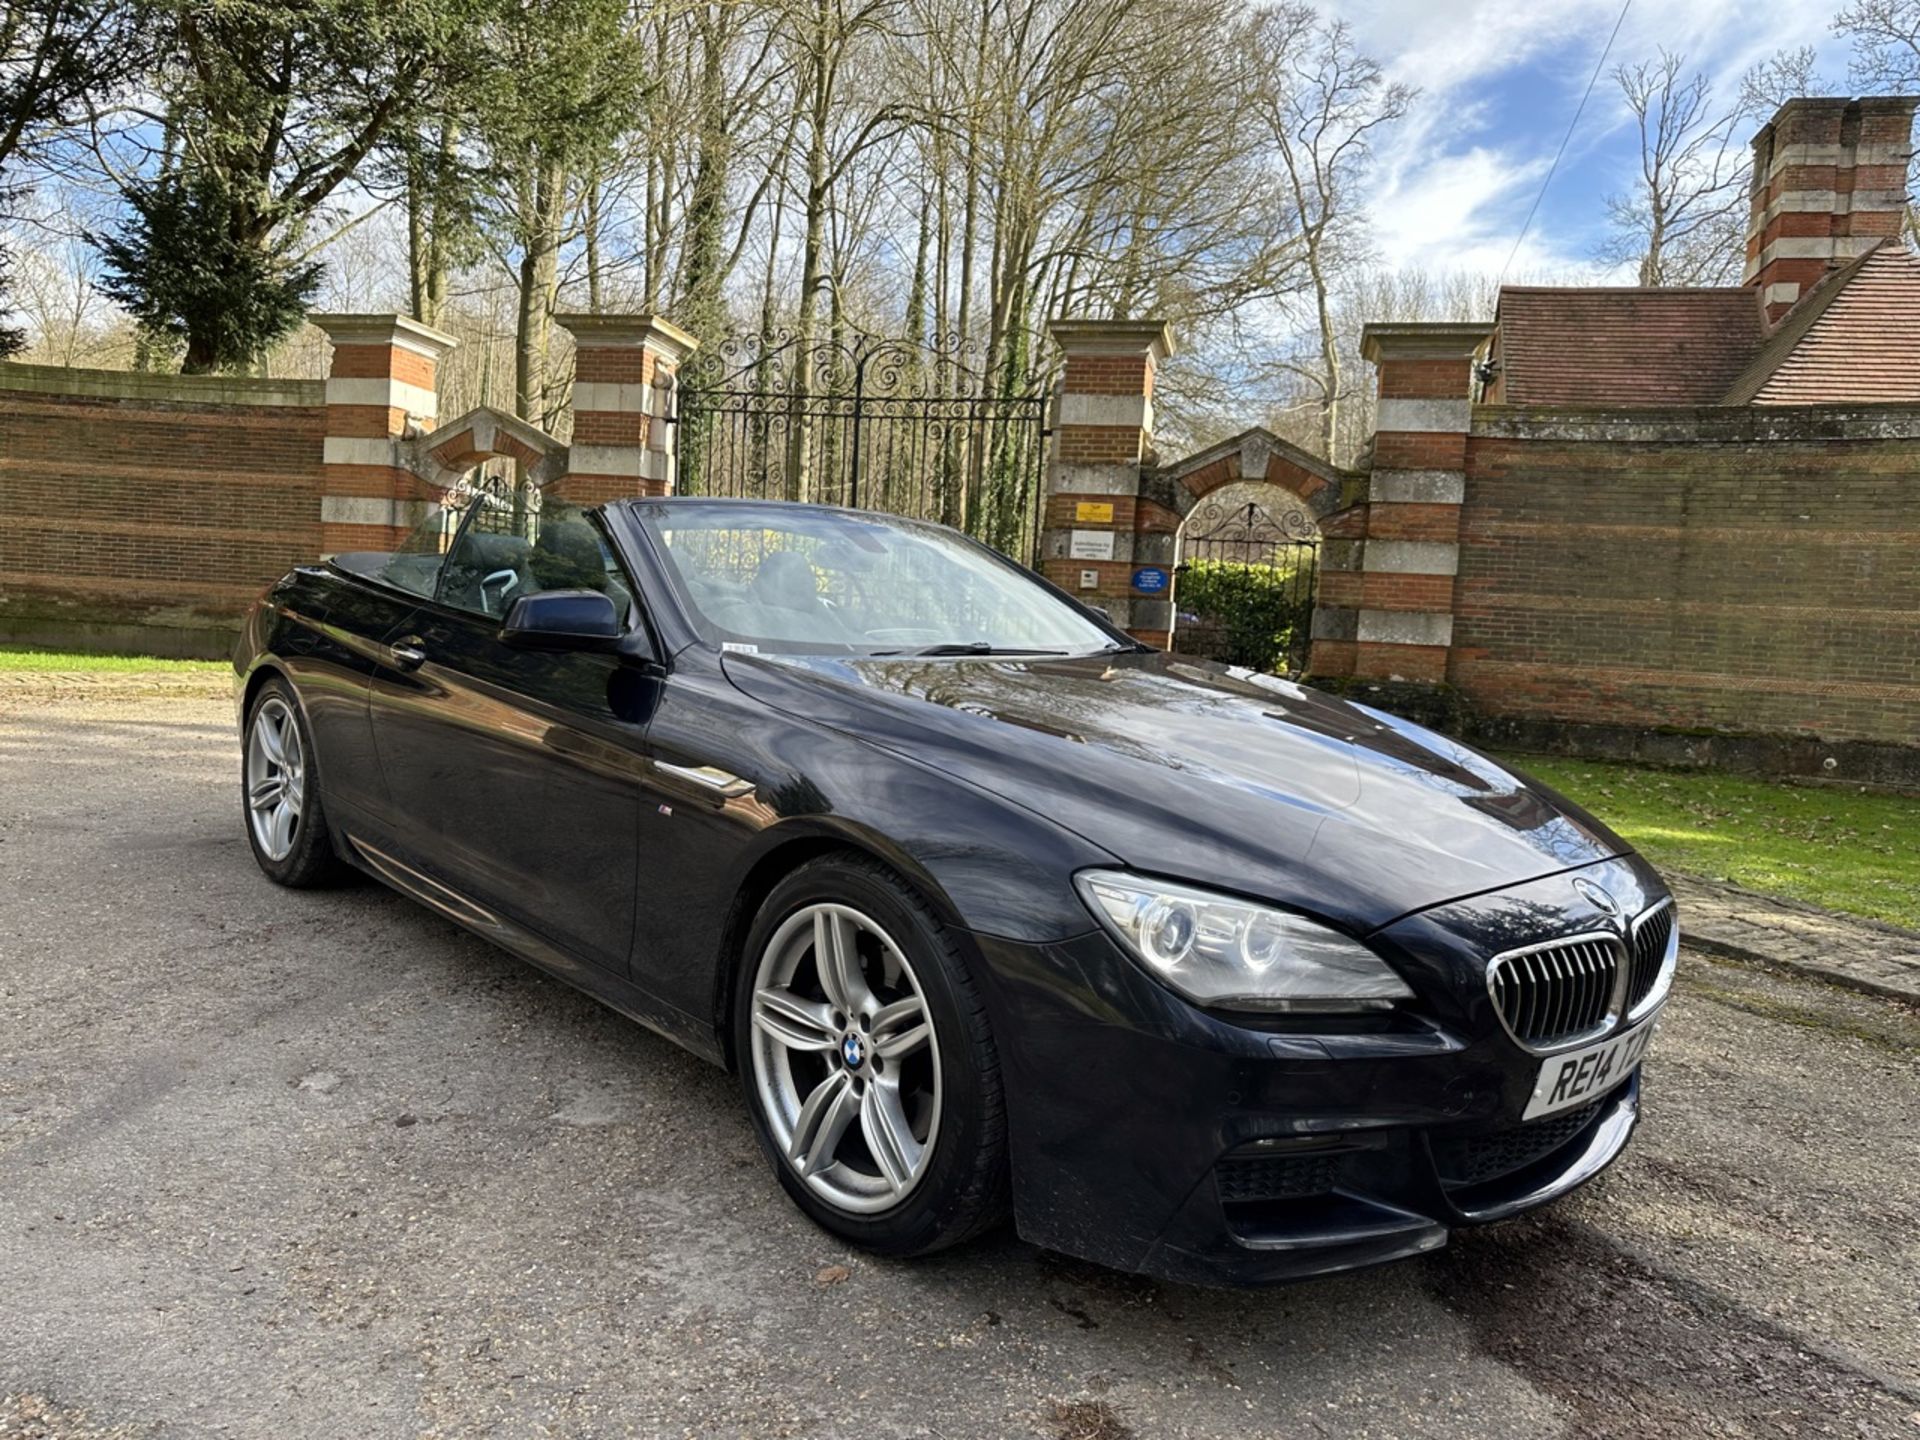 (RESERVE MET) BMW 6 SERIES 640d (M SPORT) Ultimate Summer Car - AUTOMATIC - Convertible - 2014